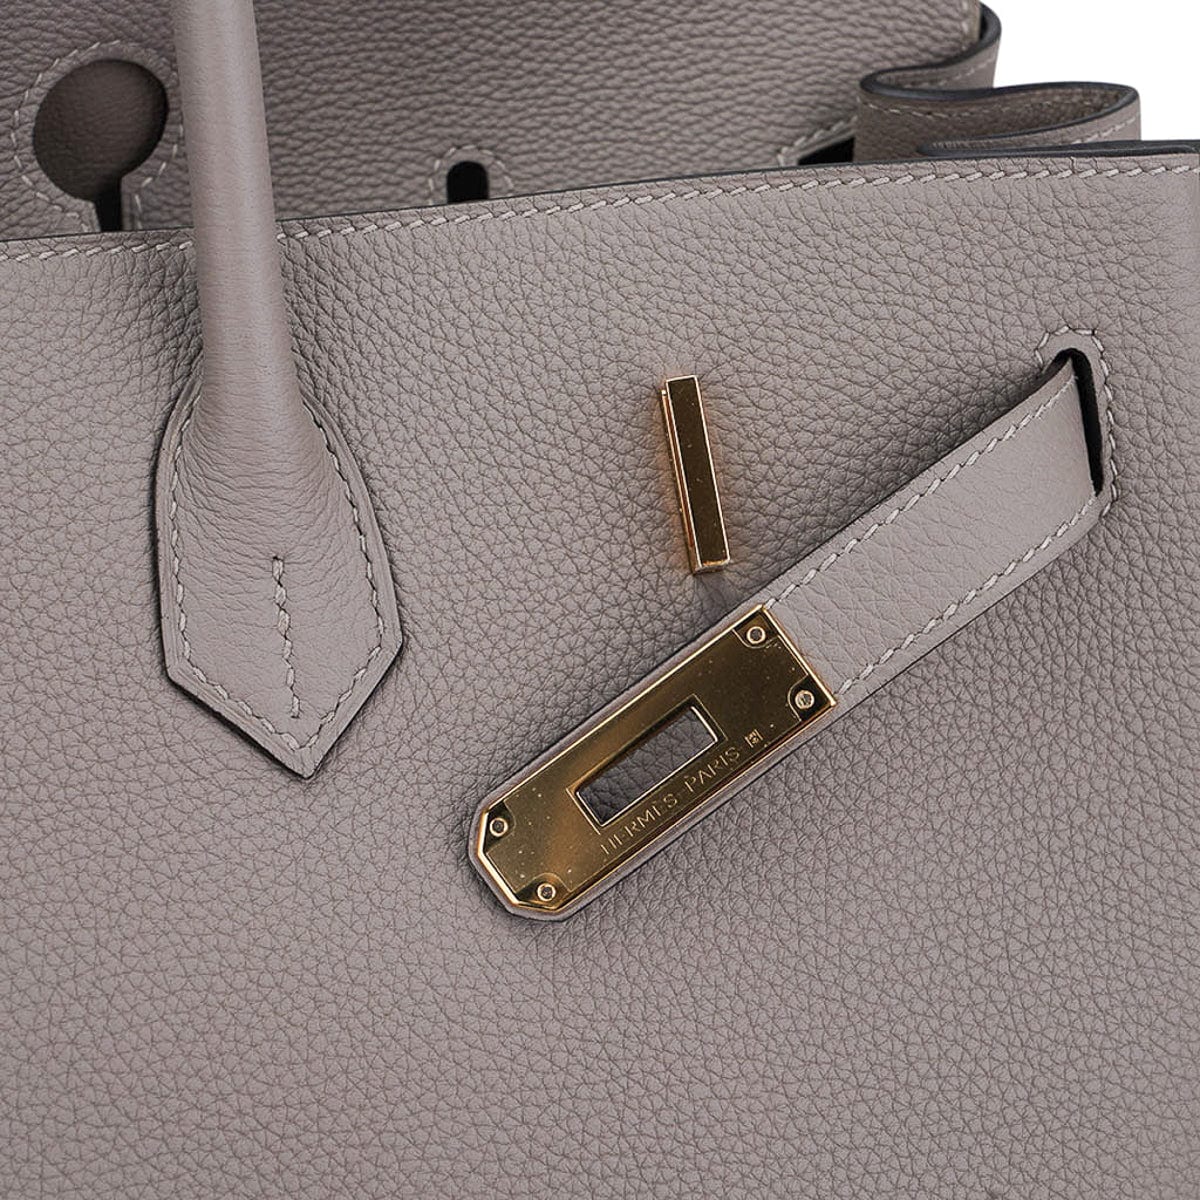 Hermes Limited Edition Birkin 25 Bag in Grizzly Gris Caillou Etoupe Swift  Leather